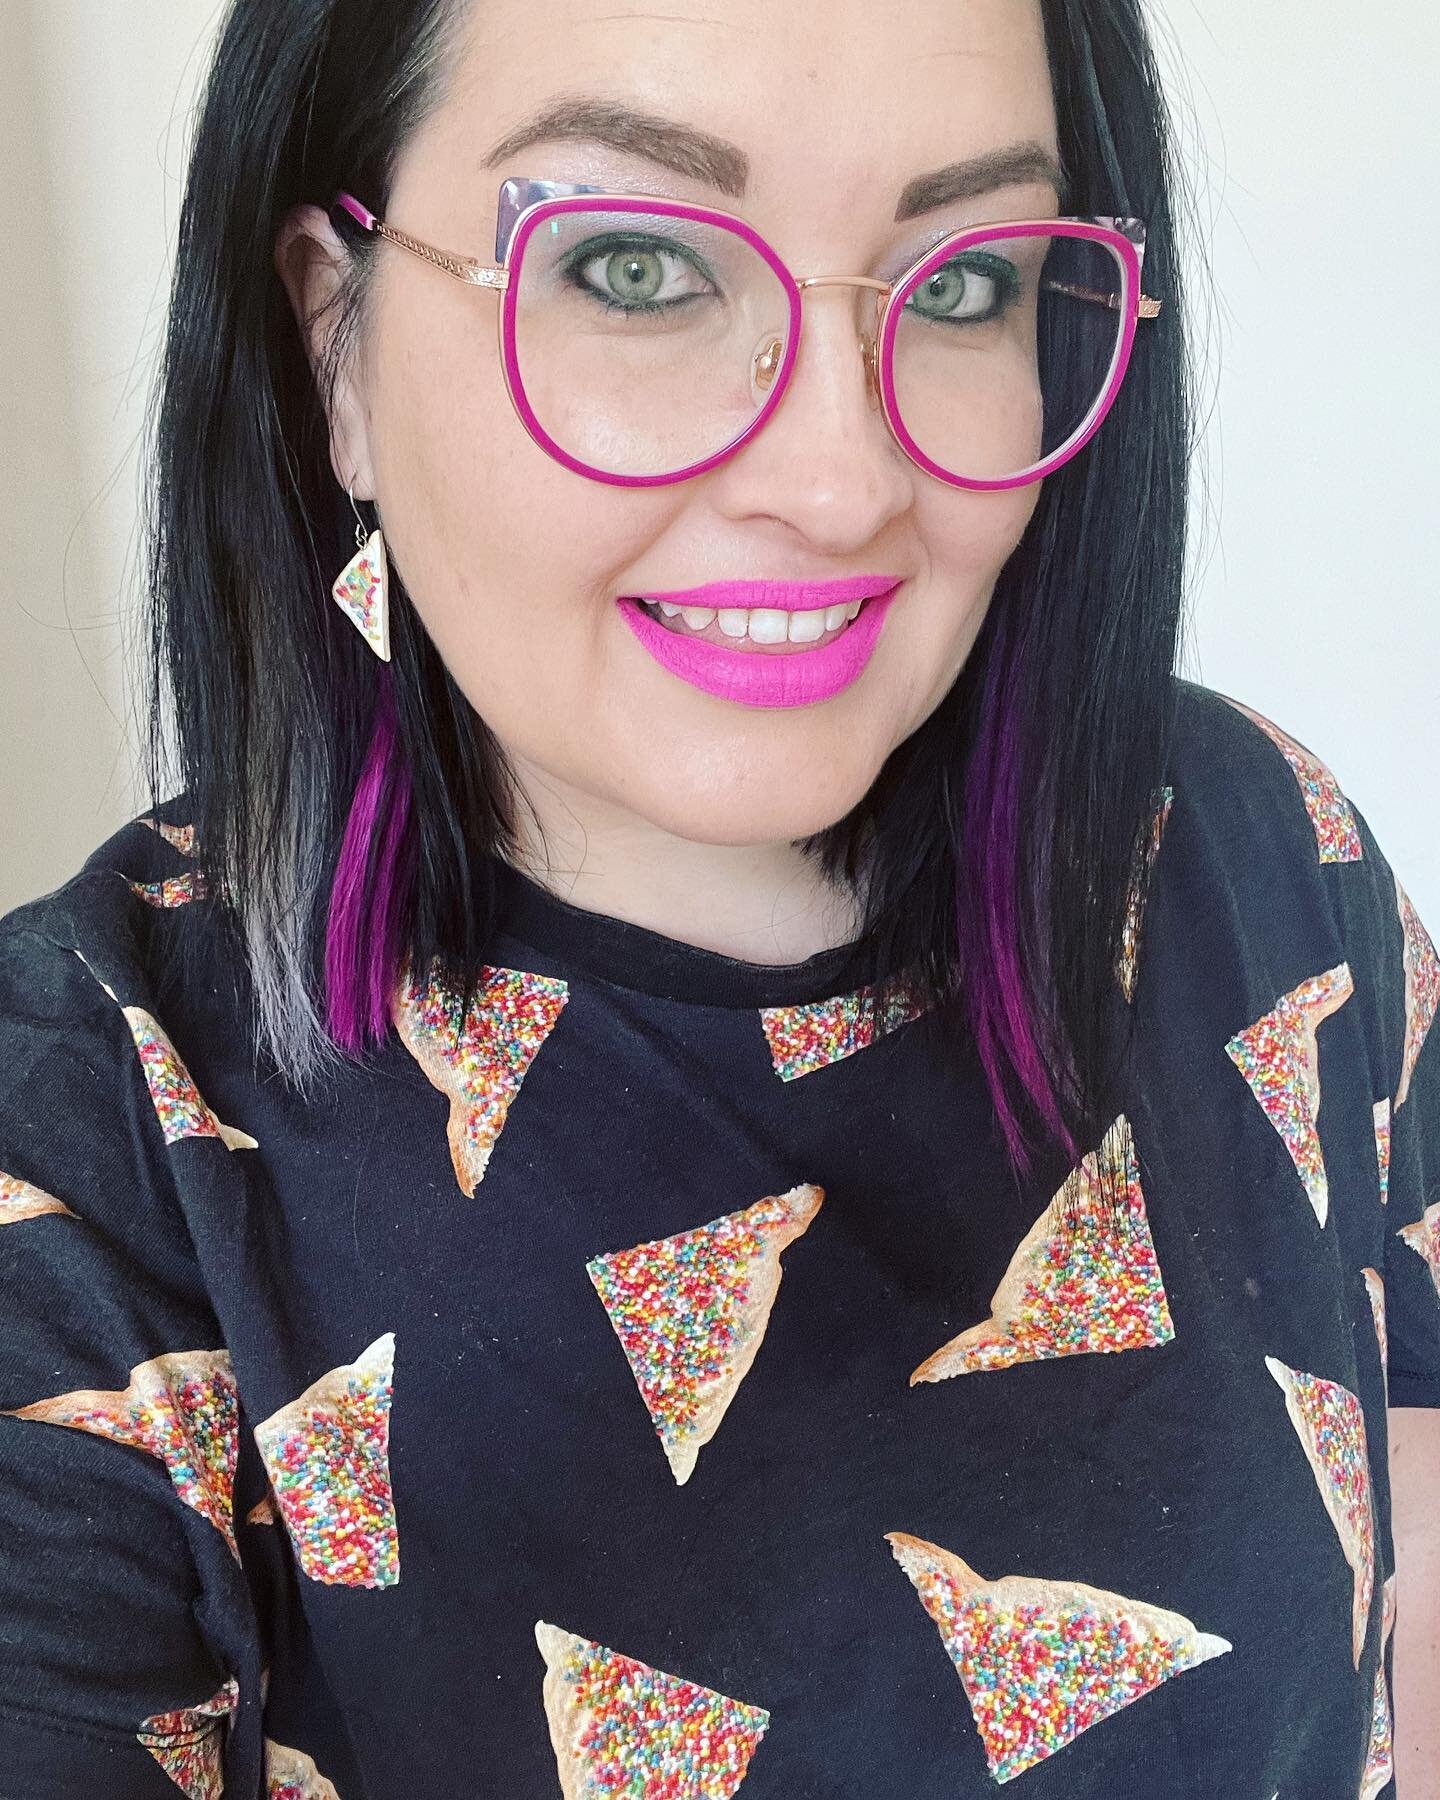 It&rsquo;s #FairyBread day and my birthday! A good time to remember that food isn&rsquo;t just fuel it&rsquo;s also for celebration &amp; joy! 

Image: selfie of me wearing a black top with fairy bread print and fairy bread earrings. I&rsquo;m a chon